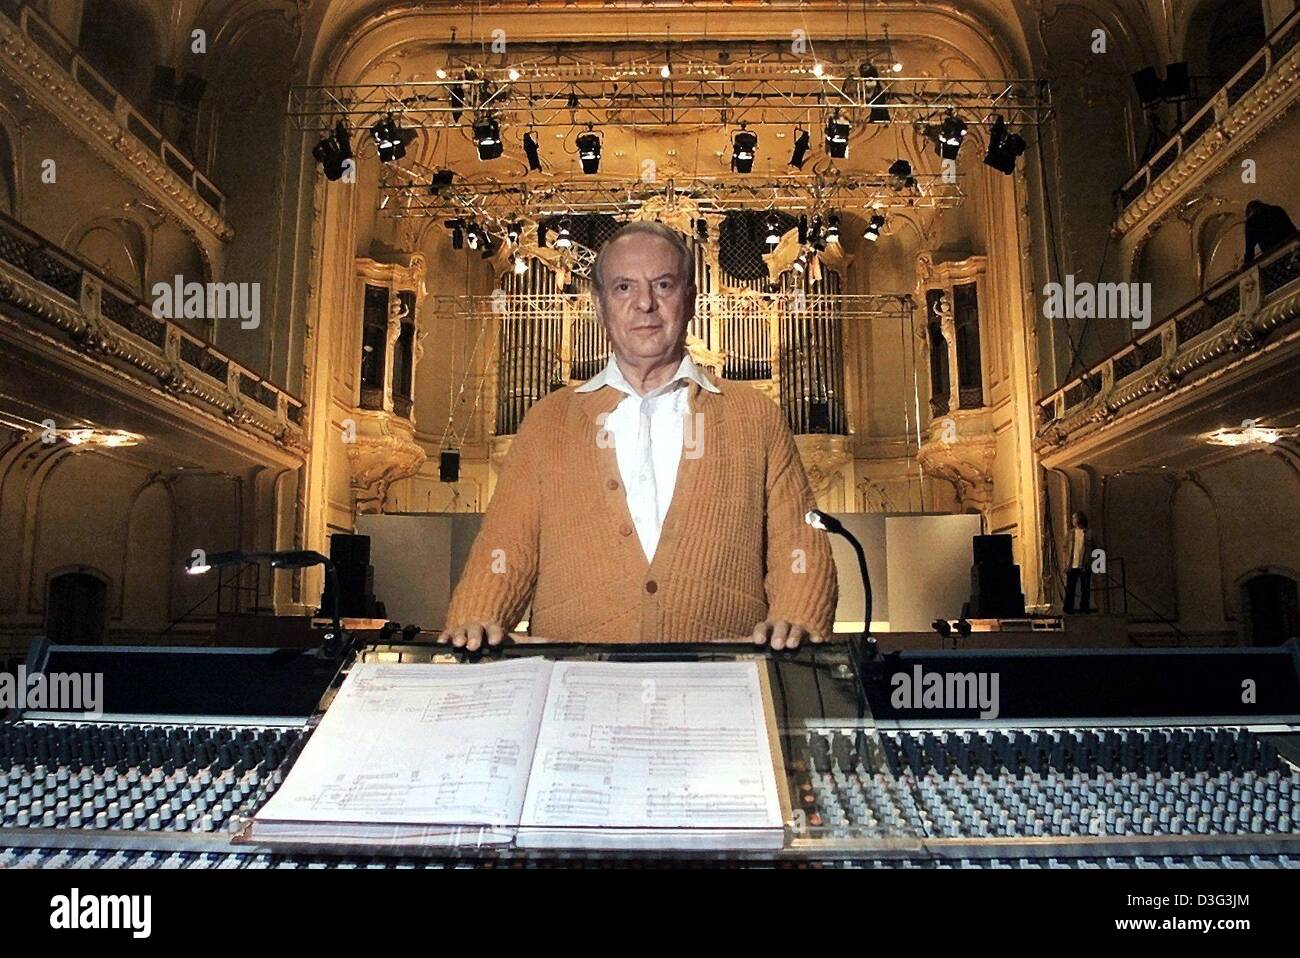 (dpa files) - German composer and avant-garde musician Karlheinz Stockhausen stands at his mixer with the musical directions in front of him and the stage in the background during a Music Festival at the concert hall in Hamburg, Germany, 17 September 2001. A progressive composer Karlheinz Stockhausen has consistently ventured into unknown musical territory. He was fascinated by the Stock Photo